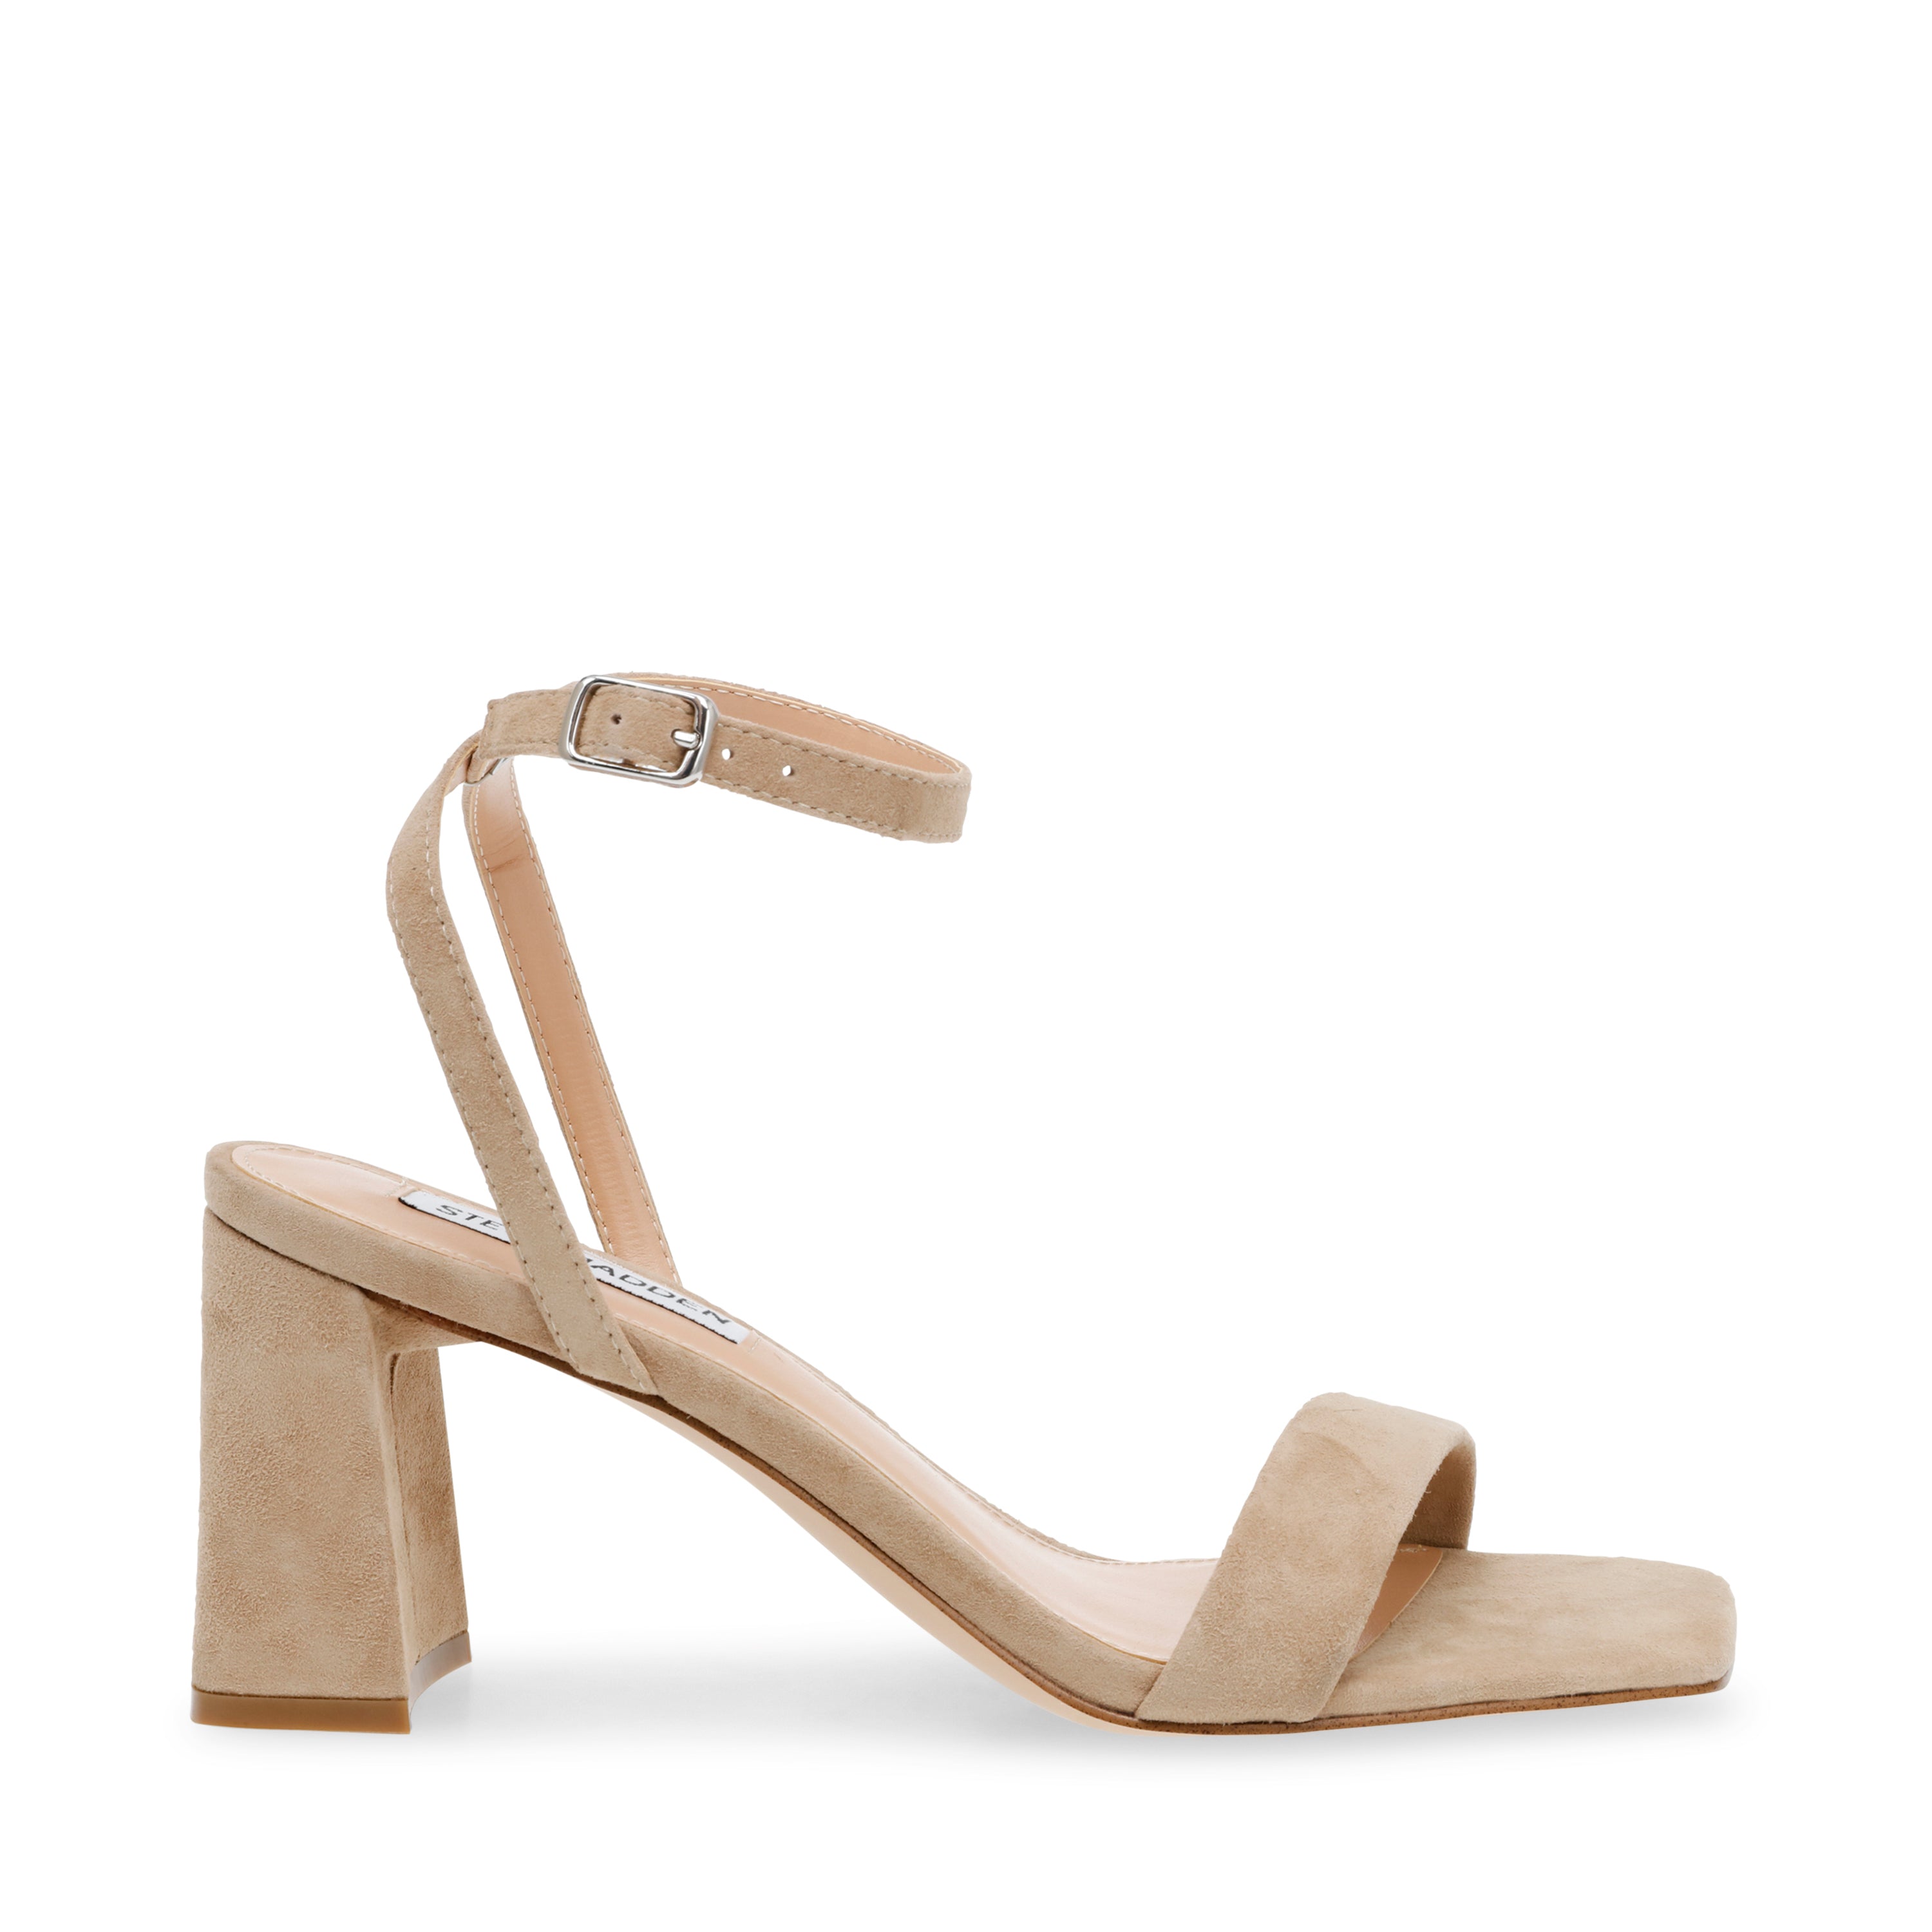 Luxe Sandal - Tan Suede